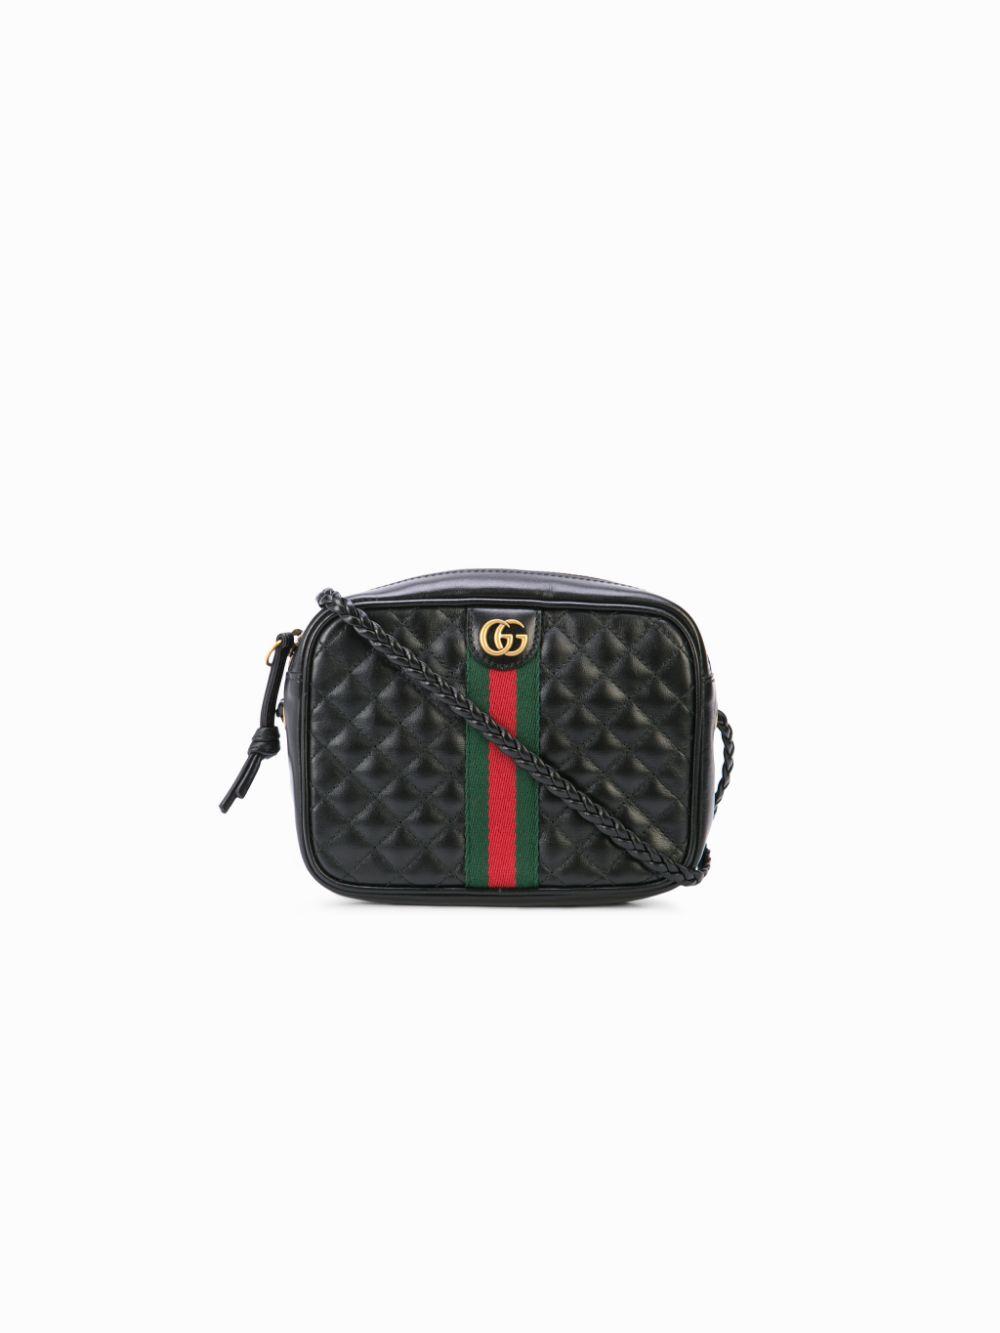 Gucci Black Quilted-leather Small Shoulder Bag in Black - Lyst